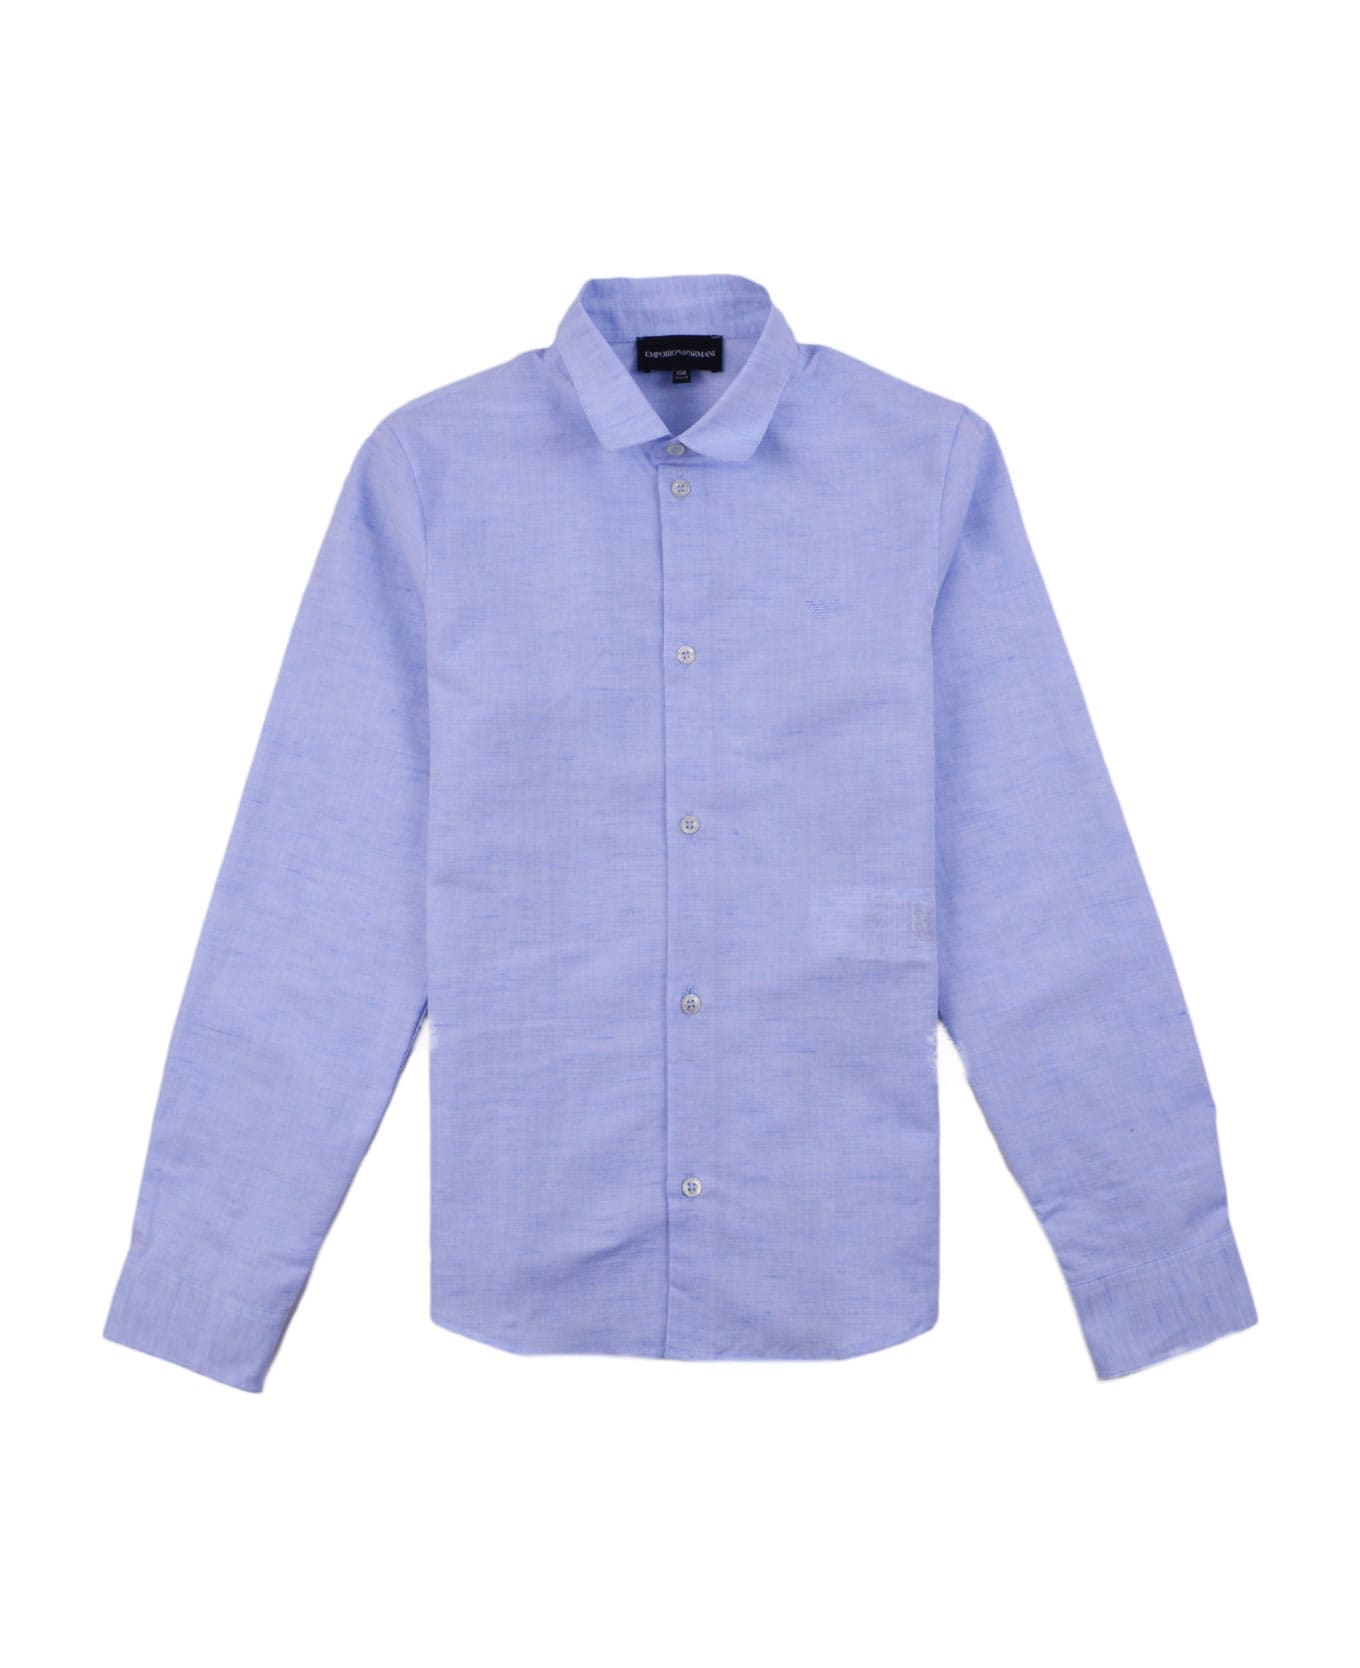 Emporio Armani Shirt In Cotton And Linen Blend - Light blue シャツ